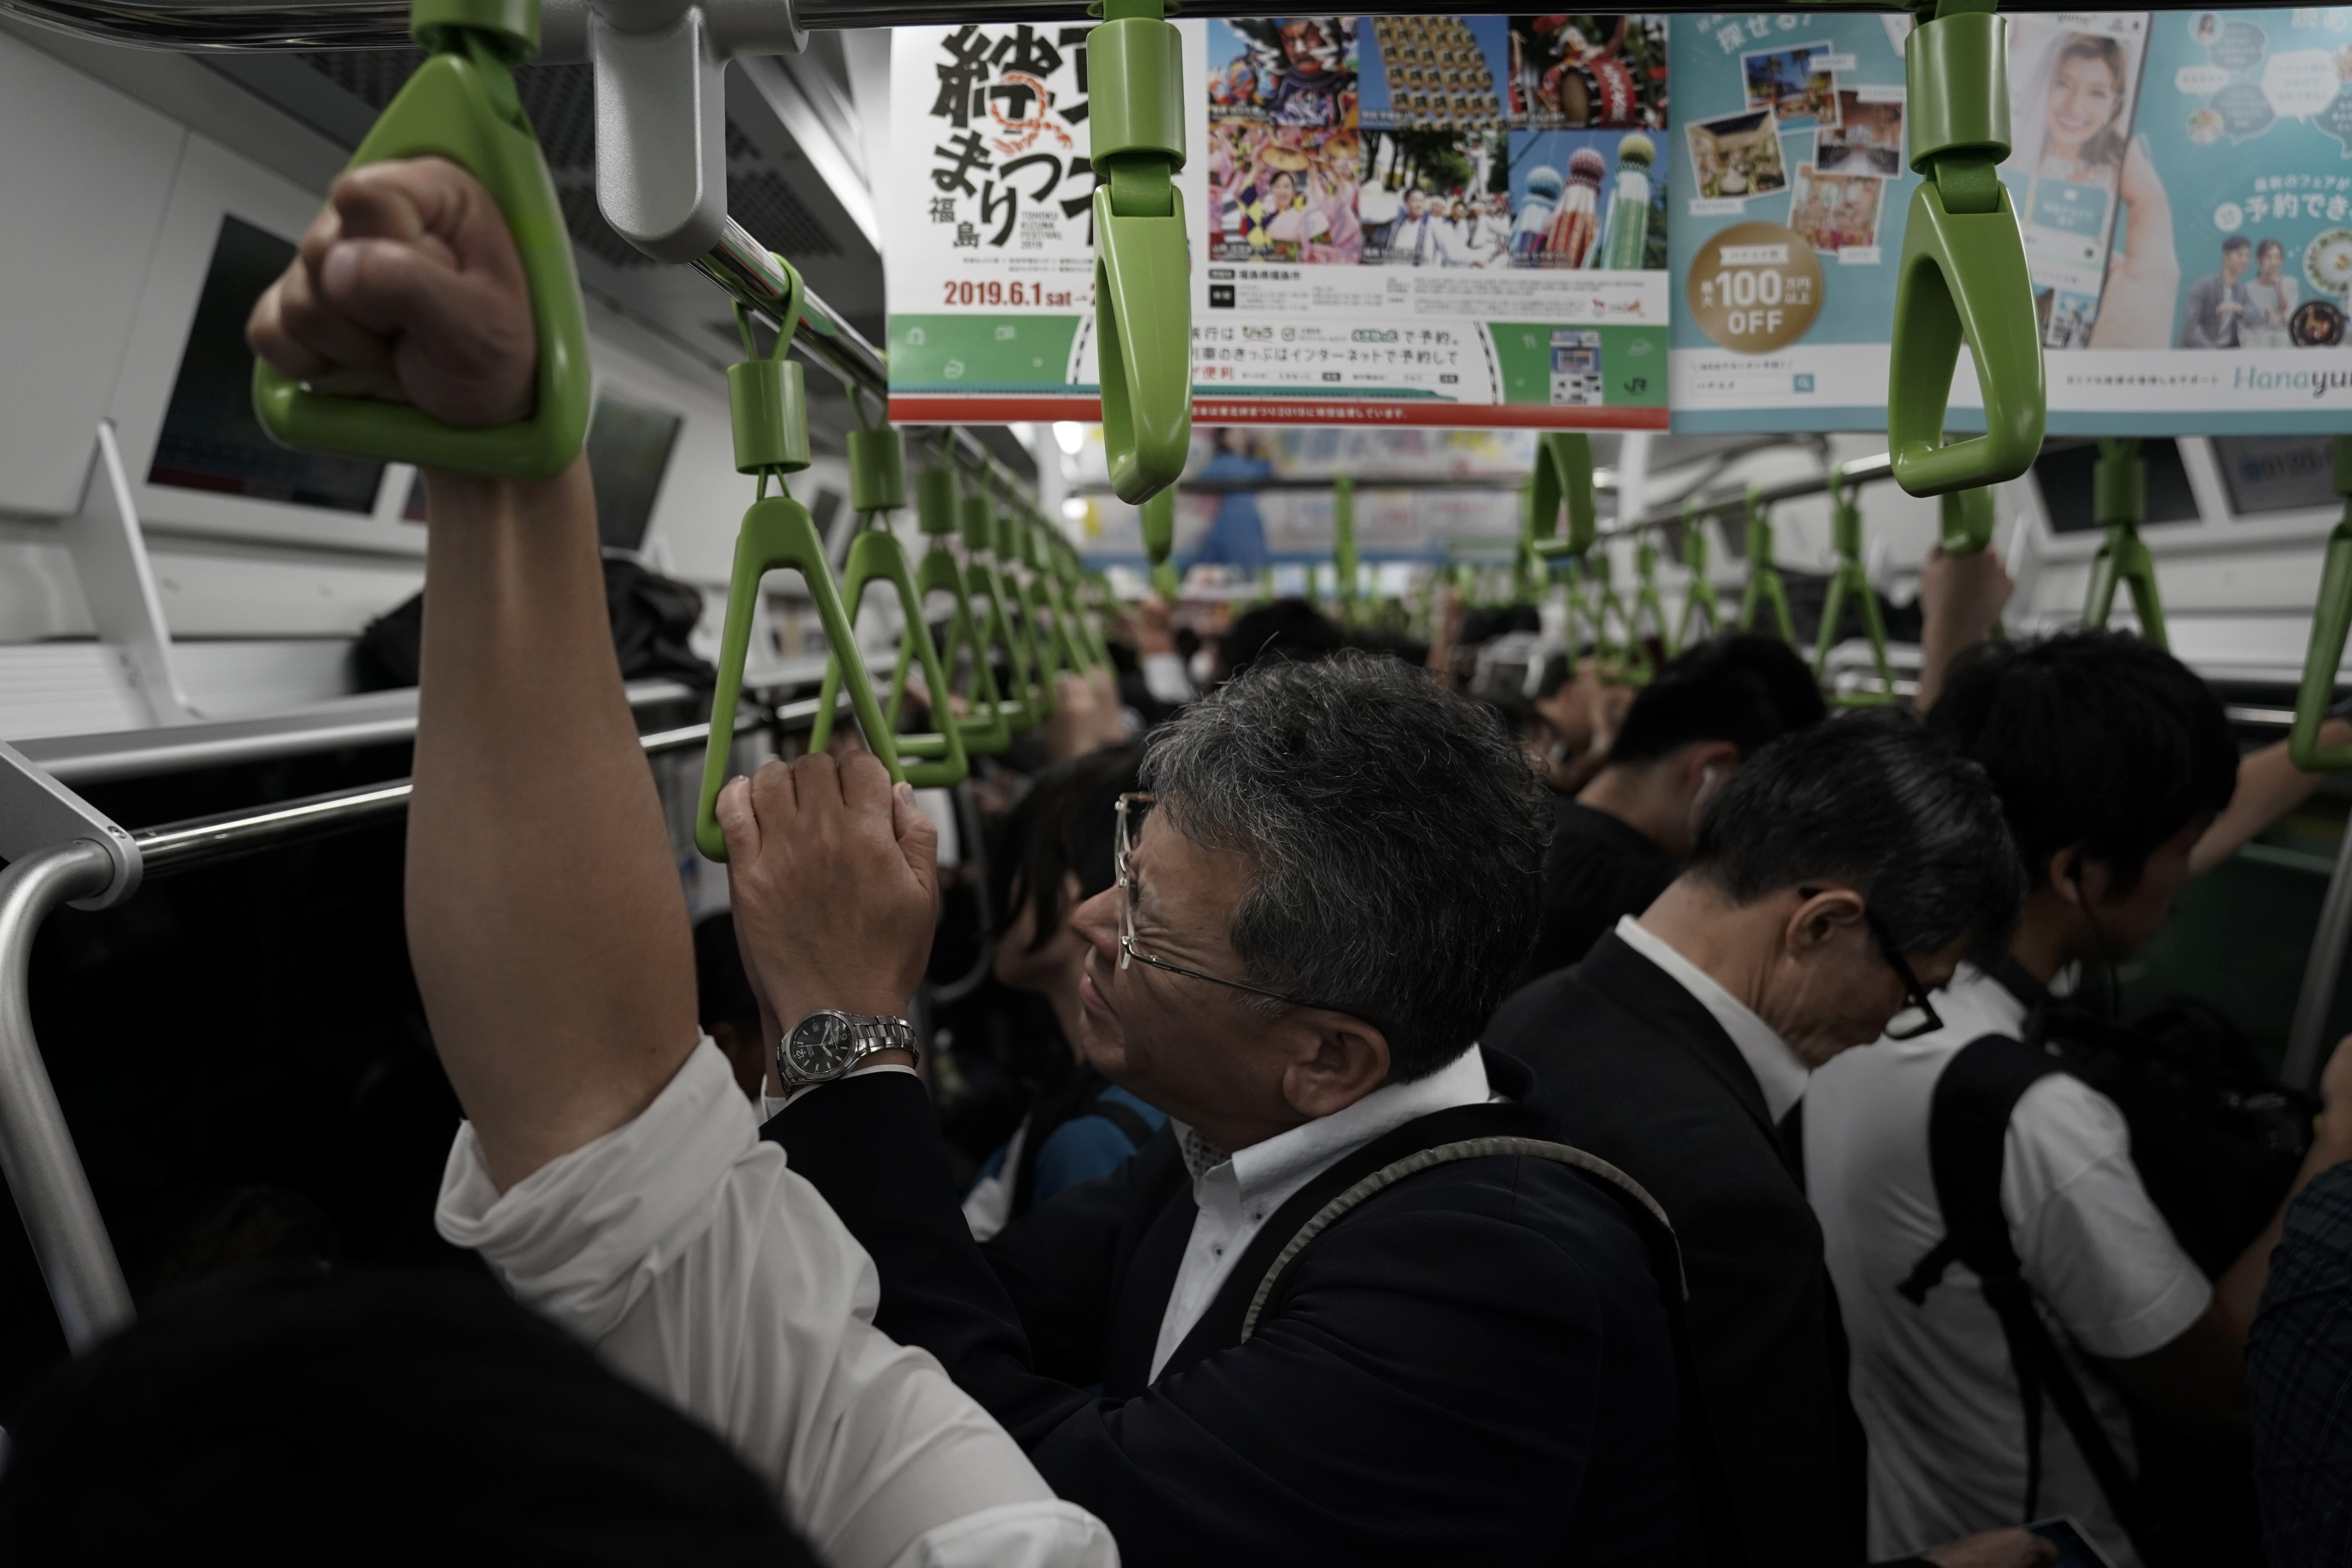 In this Tuesday, May 21, 2019, photo, a man reacts in a packed Yamanote Line train during evening rush hours in Tokyo. Want to take a glimpse of daily life in downtown Tokyo? Take a ride on the Yamanote loop line. For most Tokyoites, the line means an incredibly punctual and efficient transportation system for commuting. For tourists, it offers a glimpse into the life of ordinary people living in the city.(AP Photo/Jae C. Hong)